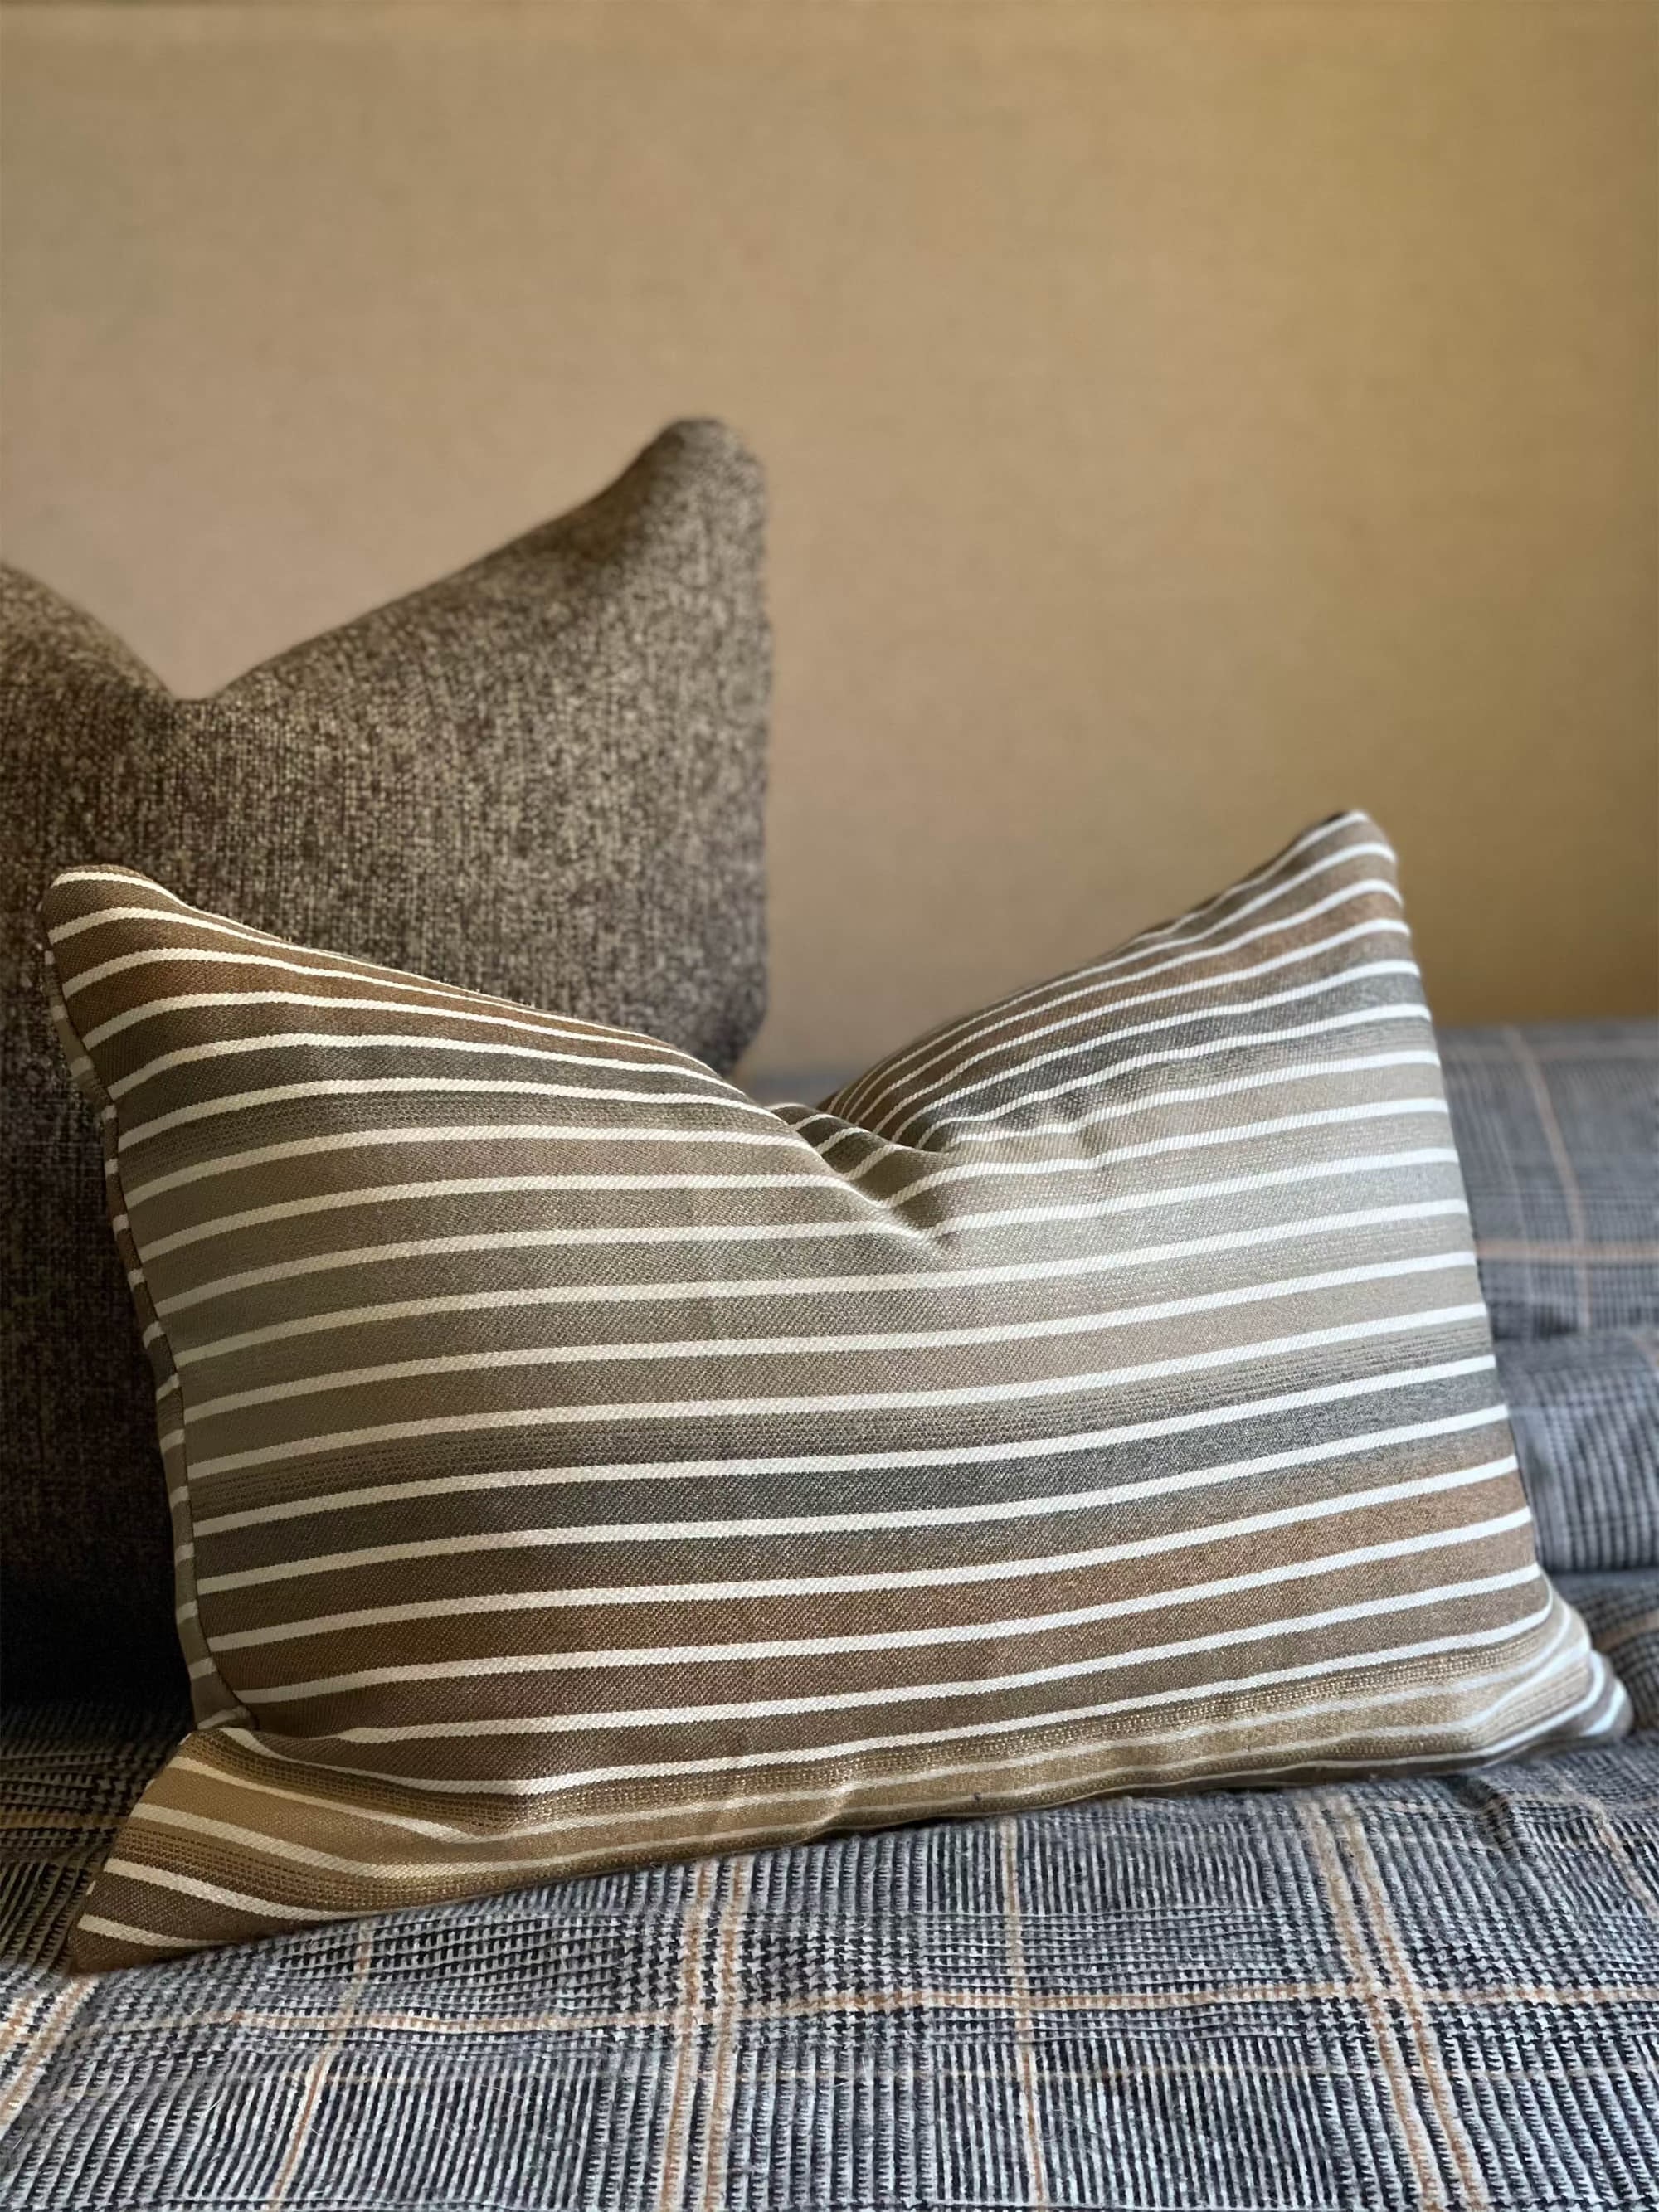 Striped throw pillow for bed in earthy-toned gradient brown color.